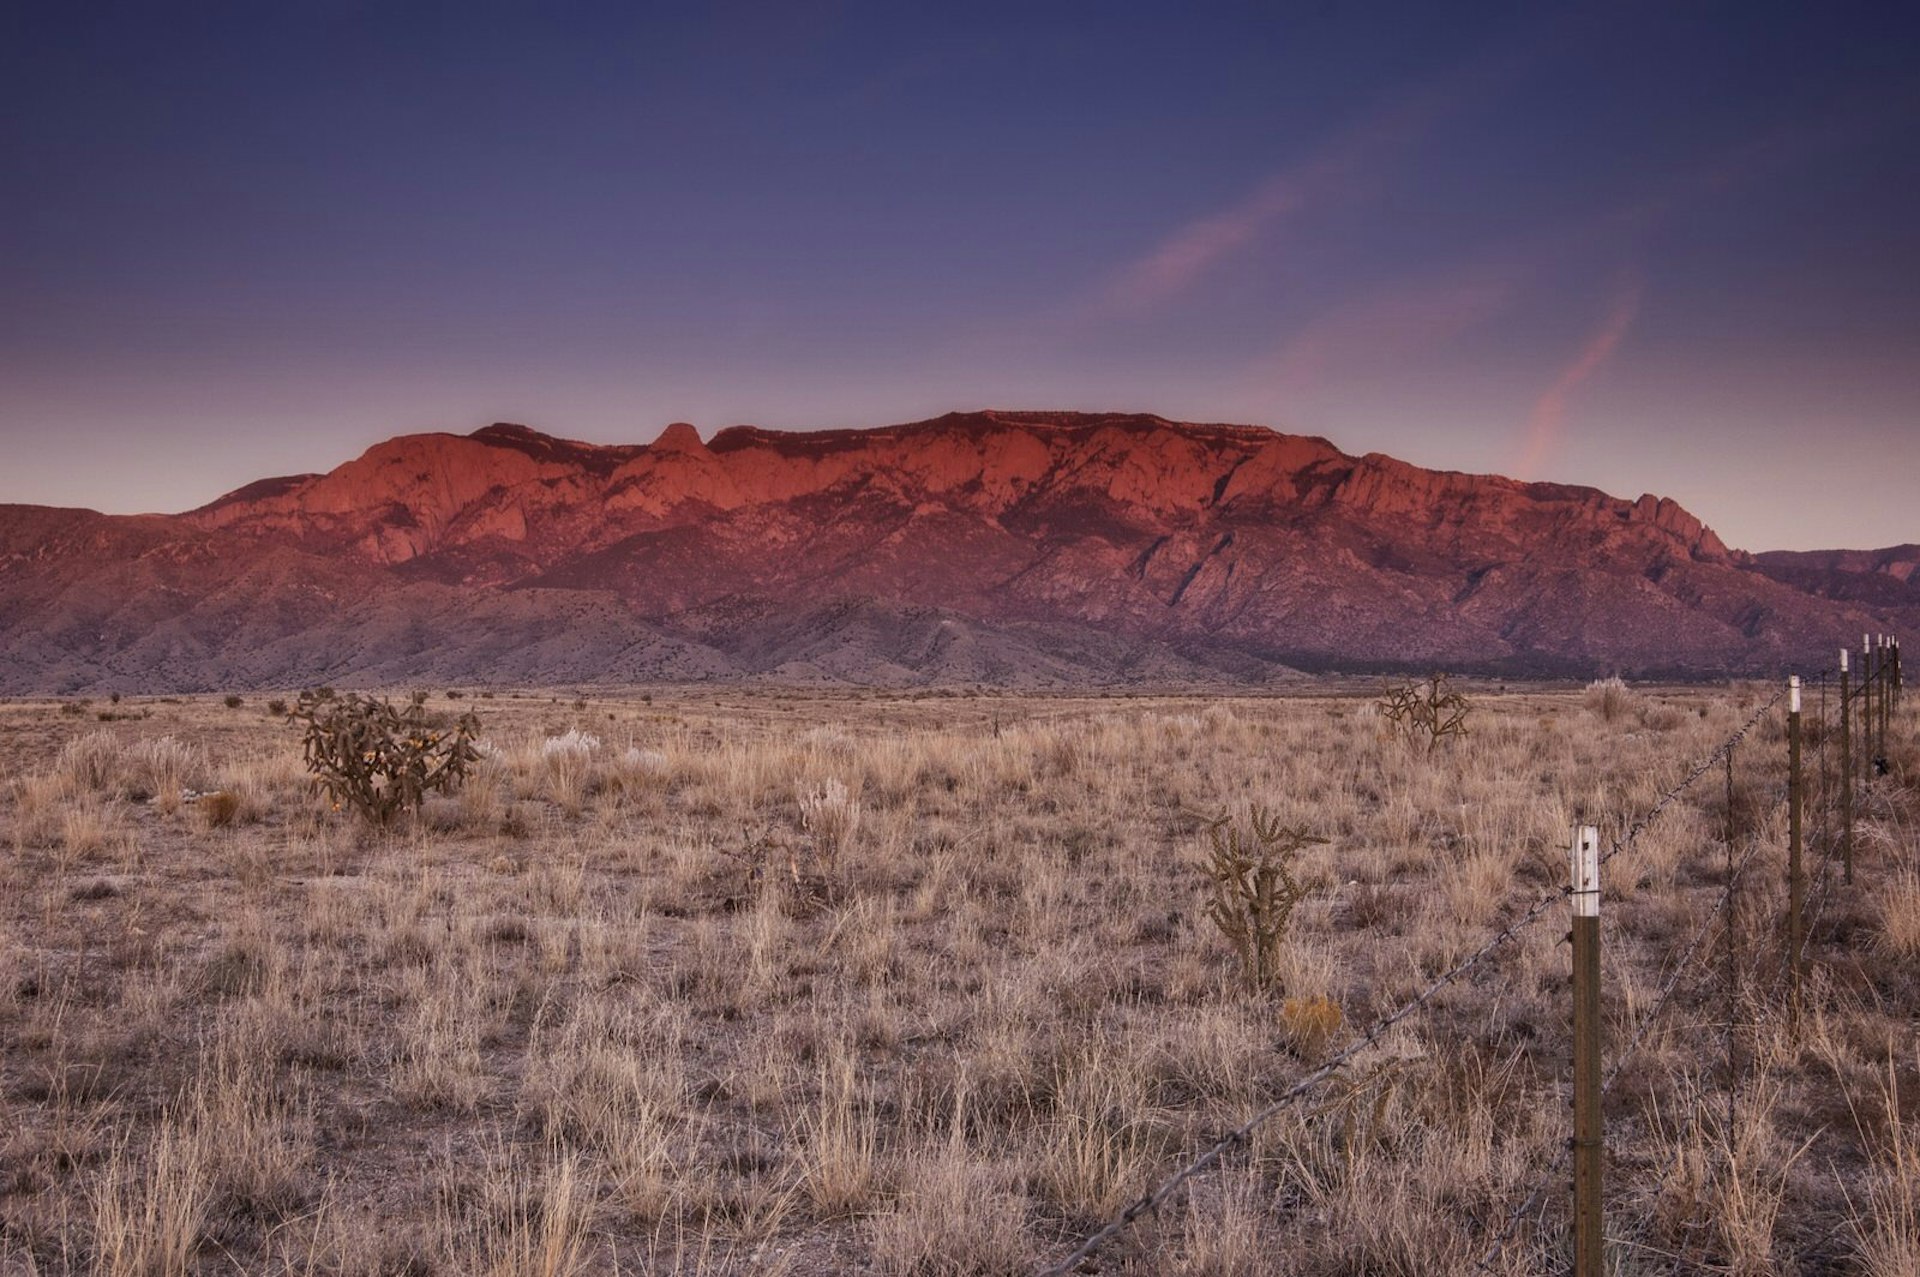 The Sandia Mountains at sunset, Albuquerque, New Mexico. The land is covered in shrubs while the mountains, tinted red by the sunset, stand imposing in the background